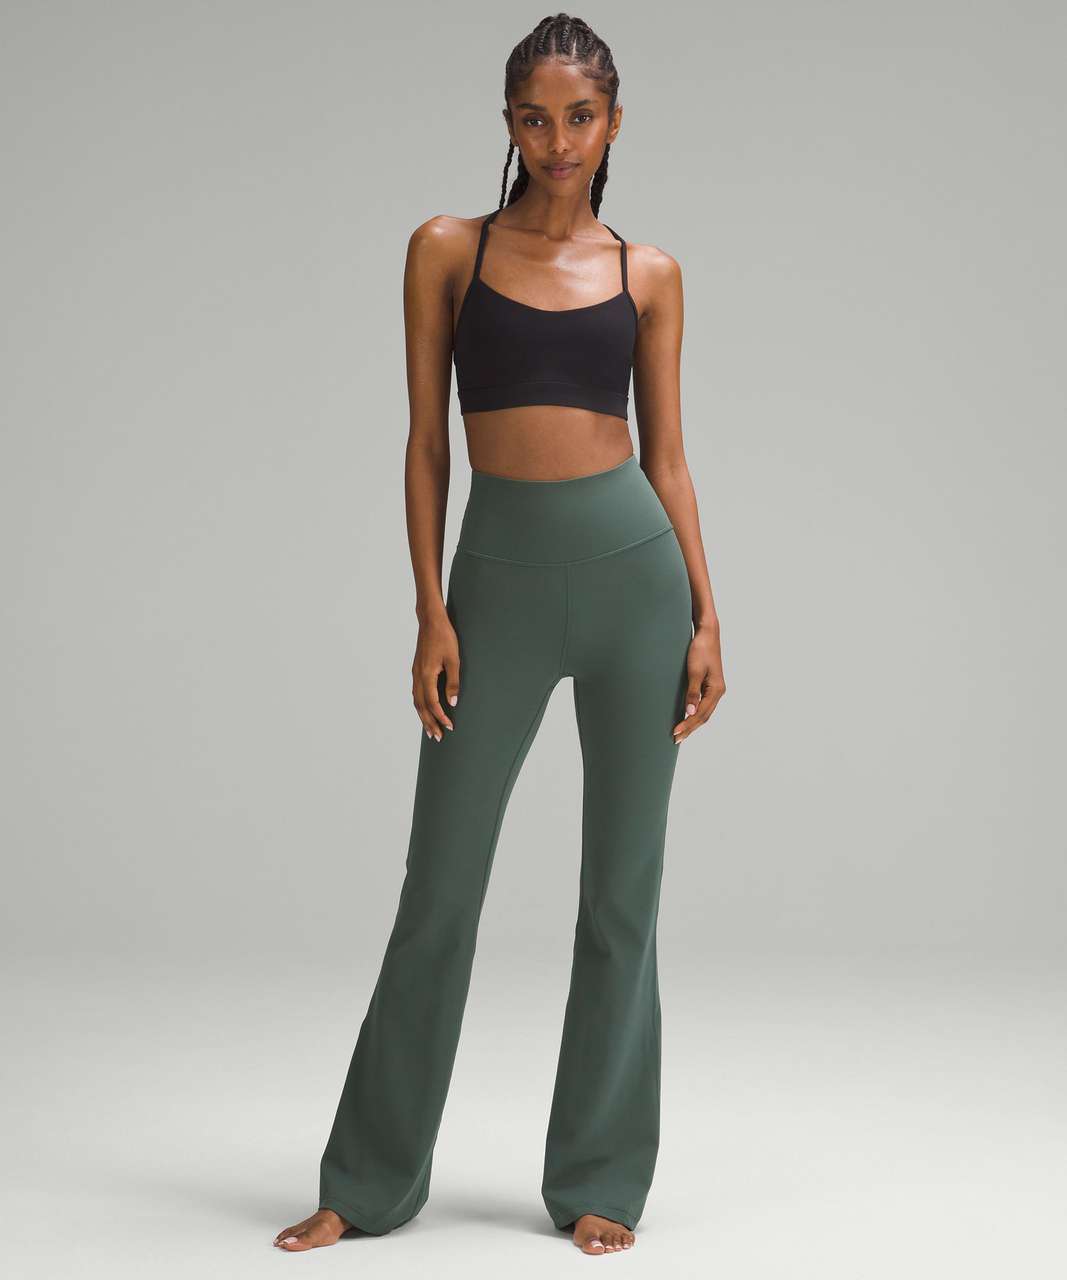 Lululemon Flare High Rise Groove Pants - Smoked Spruce Green